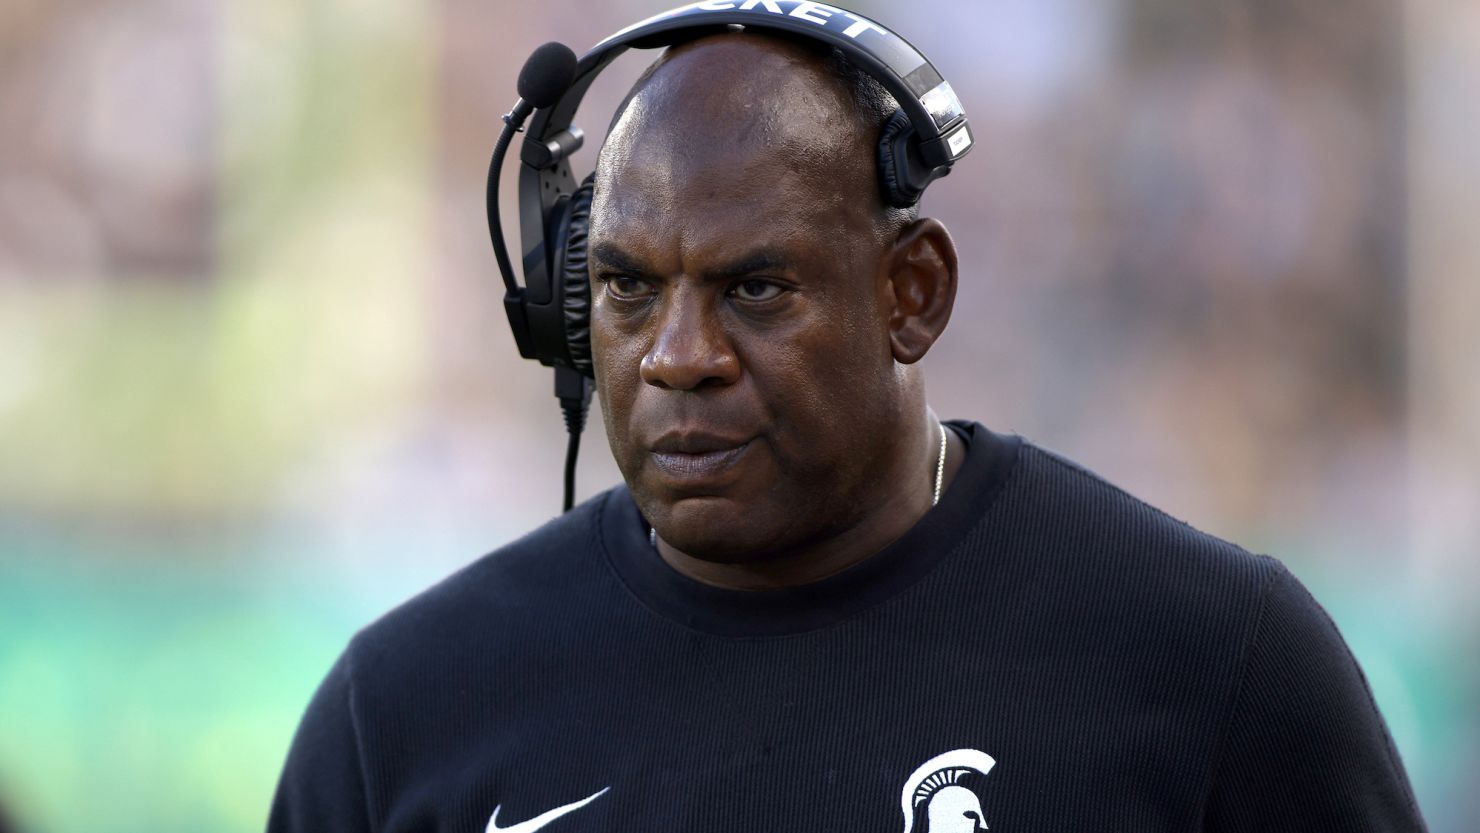 Mel Tucker, seen during a Michigan State football game on September 9, was fired by the school later that month amid allegations of sexual harassment.